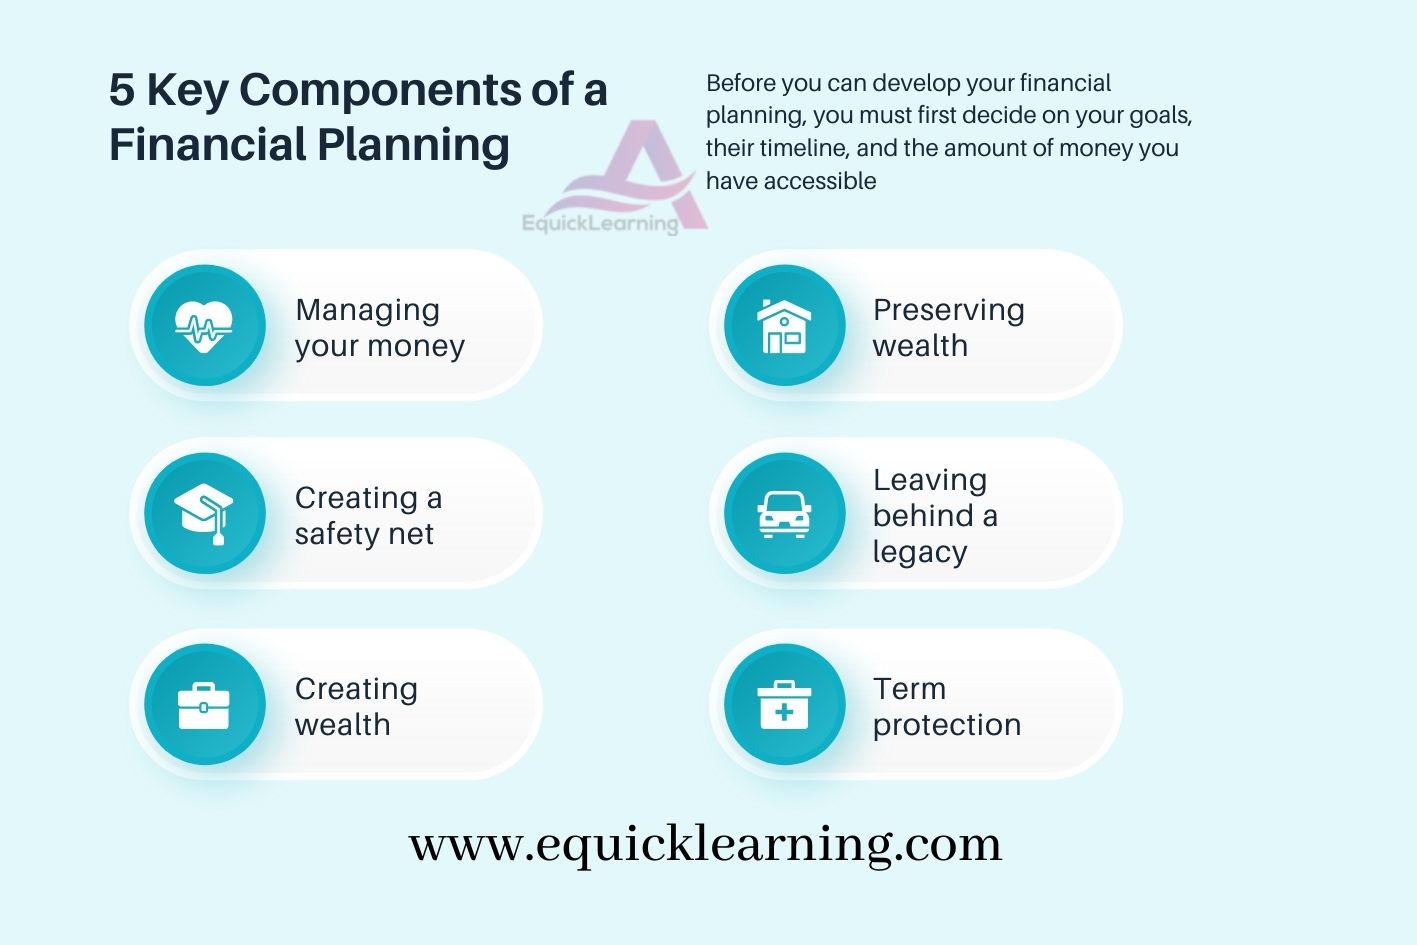 5 Key Components of a Financial Planning